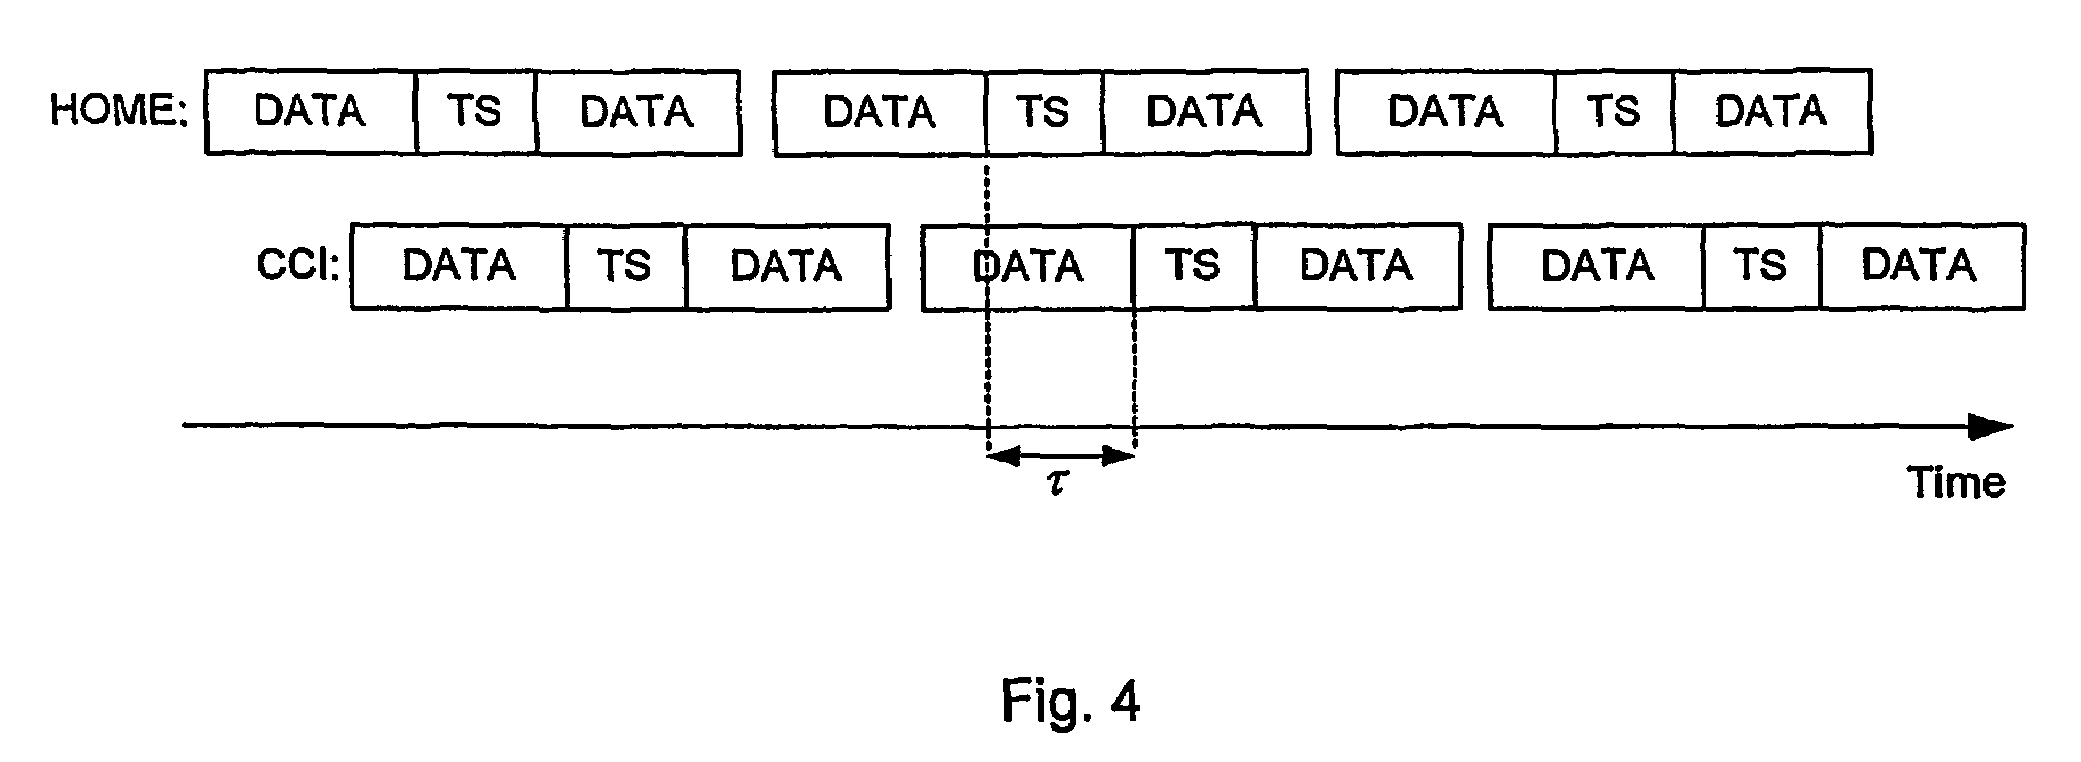 Co-channel interference suppression by estimating the time of arrival (TOA)